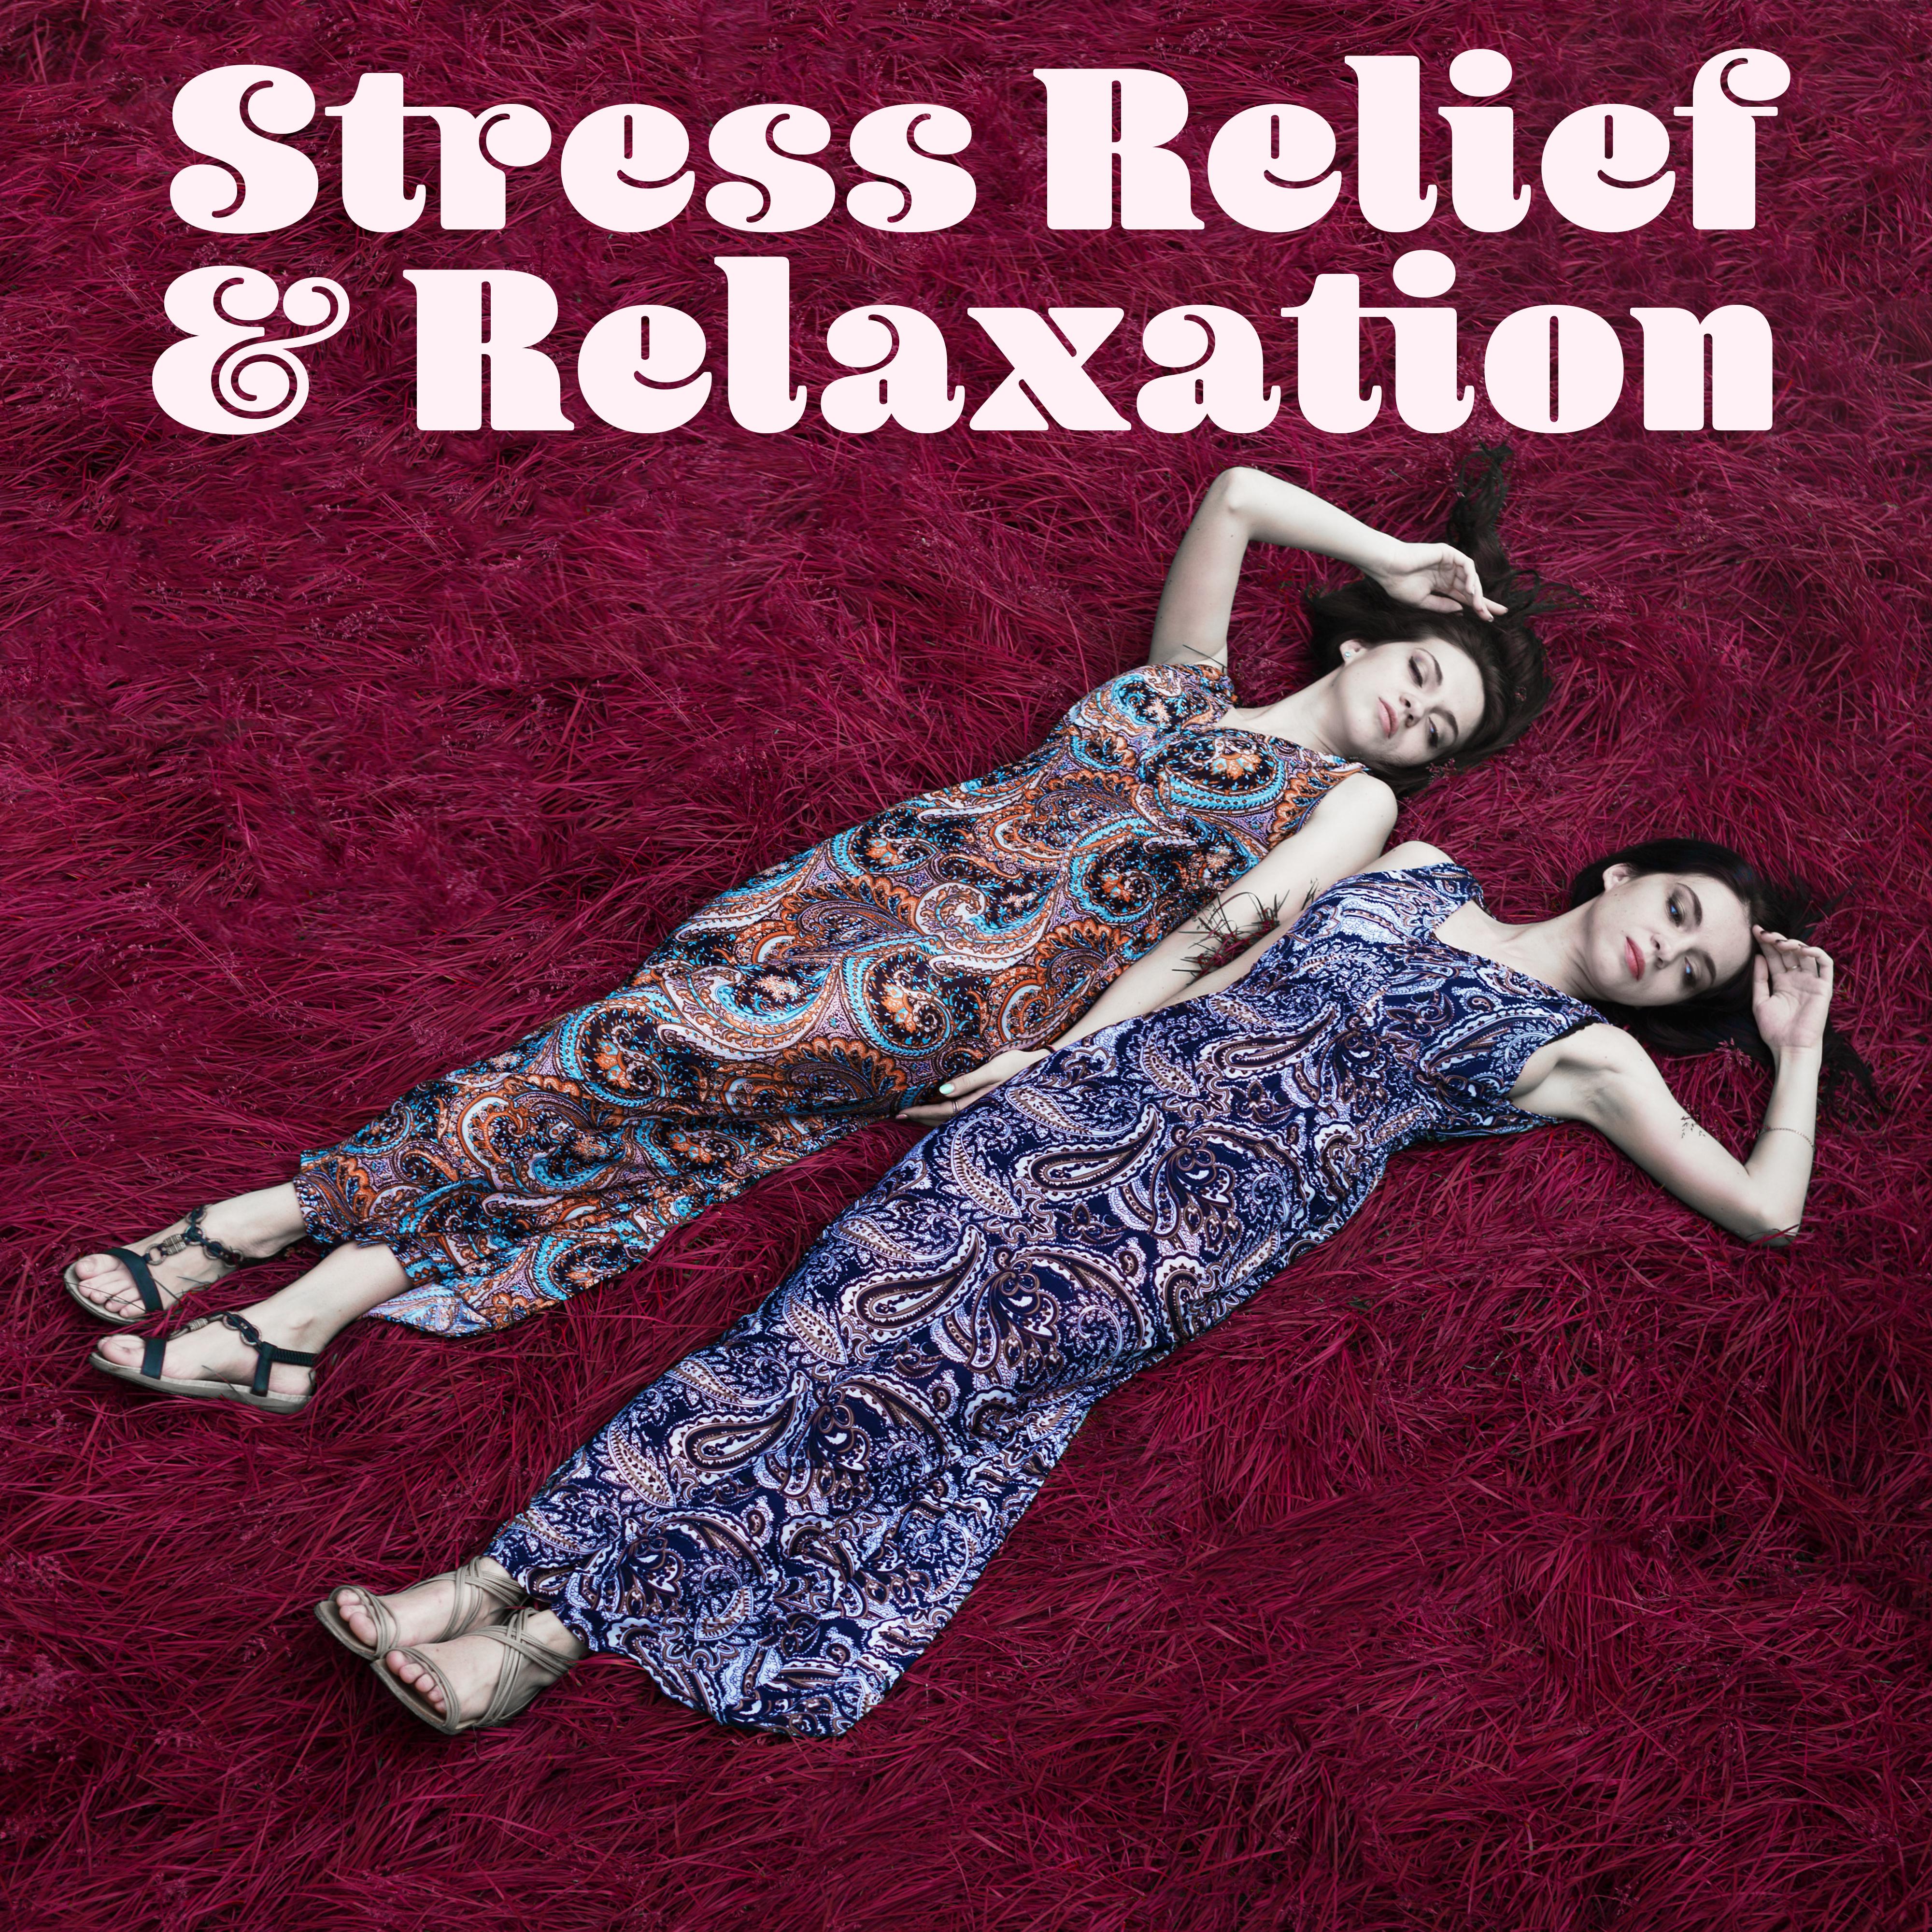 Stress Relief & Relaxation – Peaceful Music for Rest, Deep Sleep, Soothing Piano, Relaxation Sounds, Calming Melodies, Pure Mind